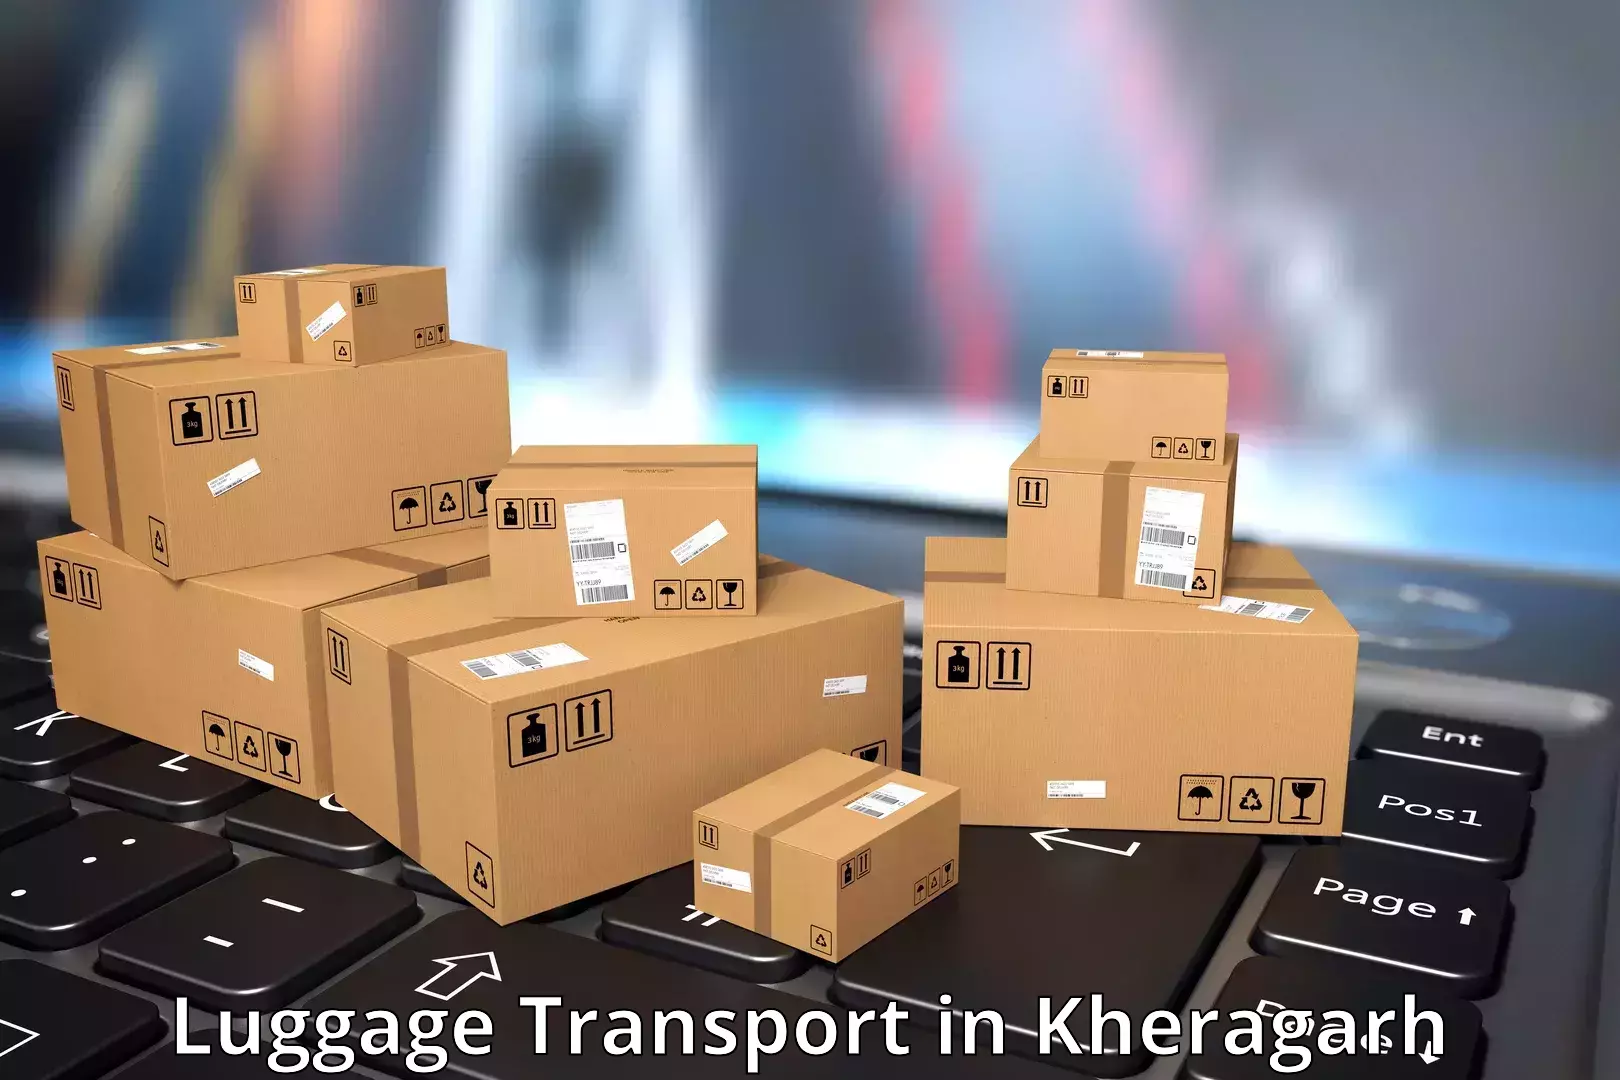 Luggage shipping trends in Kheragarh